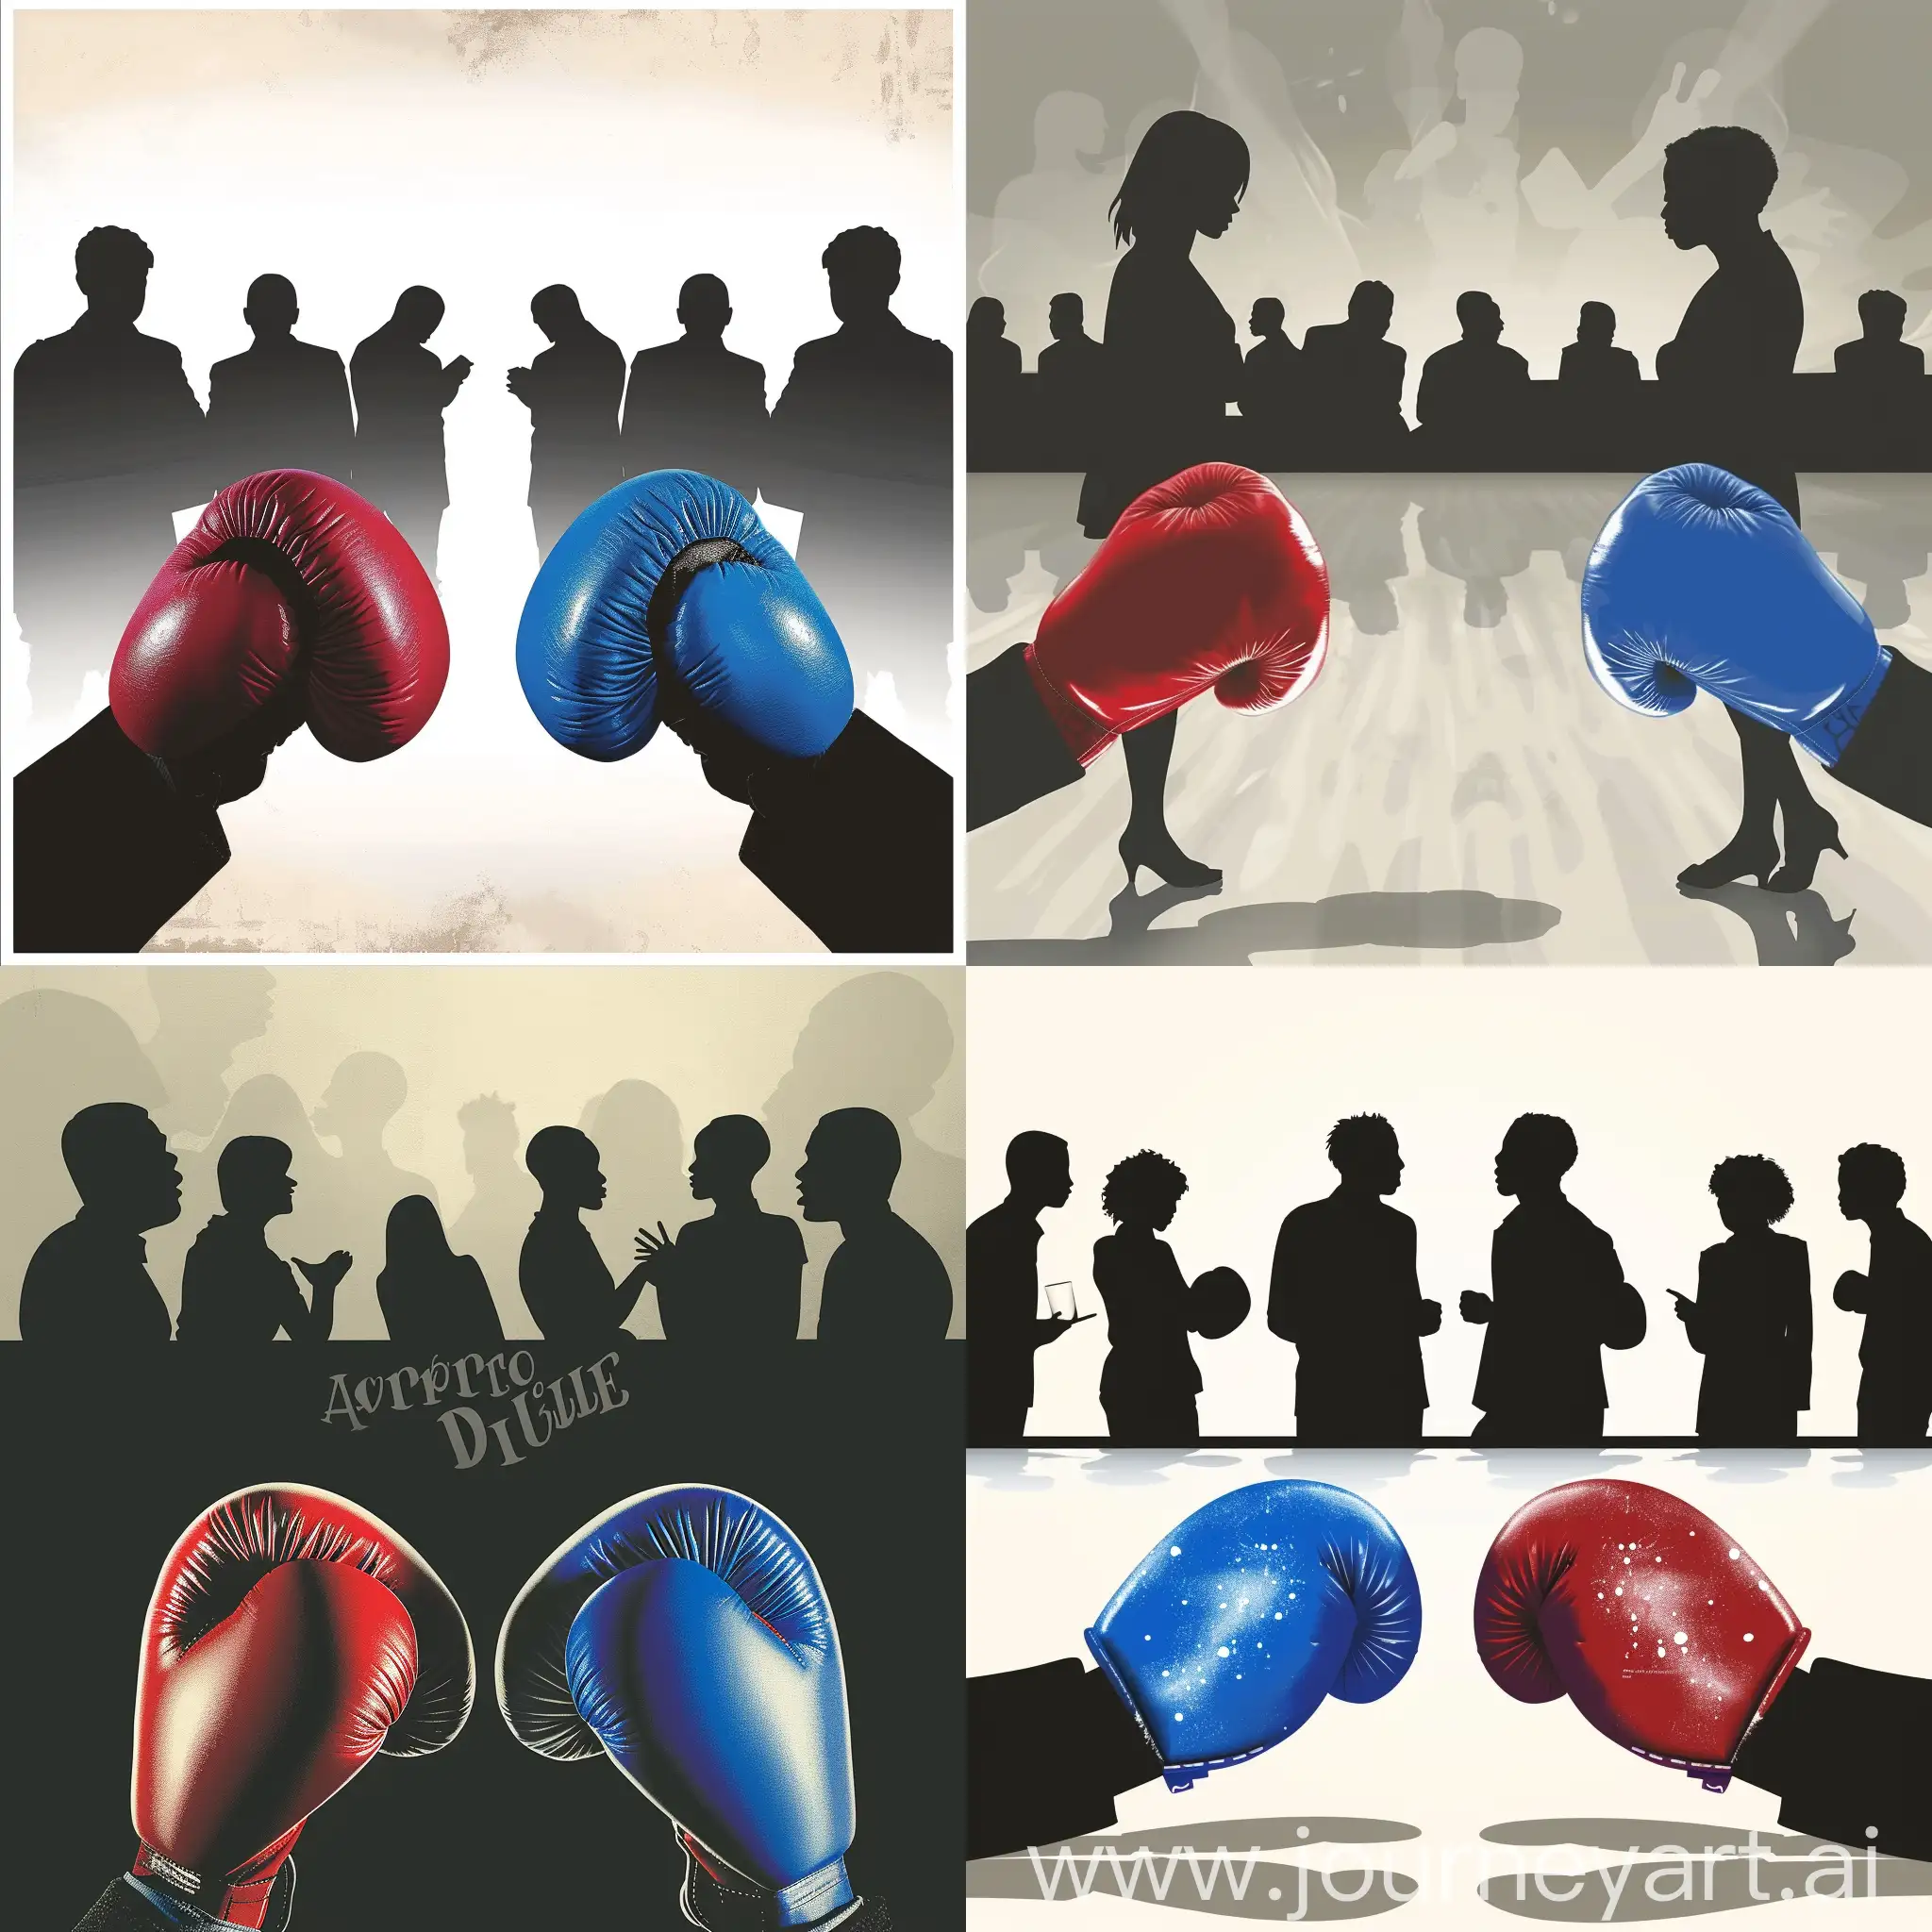 Apero-Dileme-Debate-Meeting-Red-vs-Blue-Ideologies-Clash-with-Boxing-Gloves